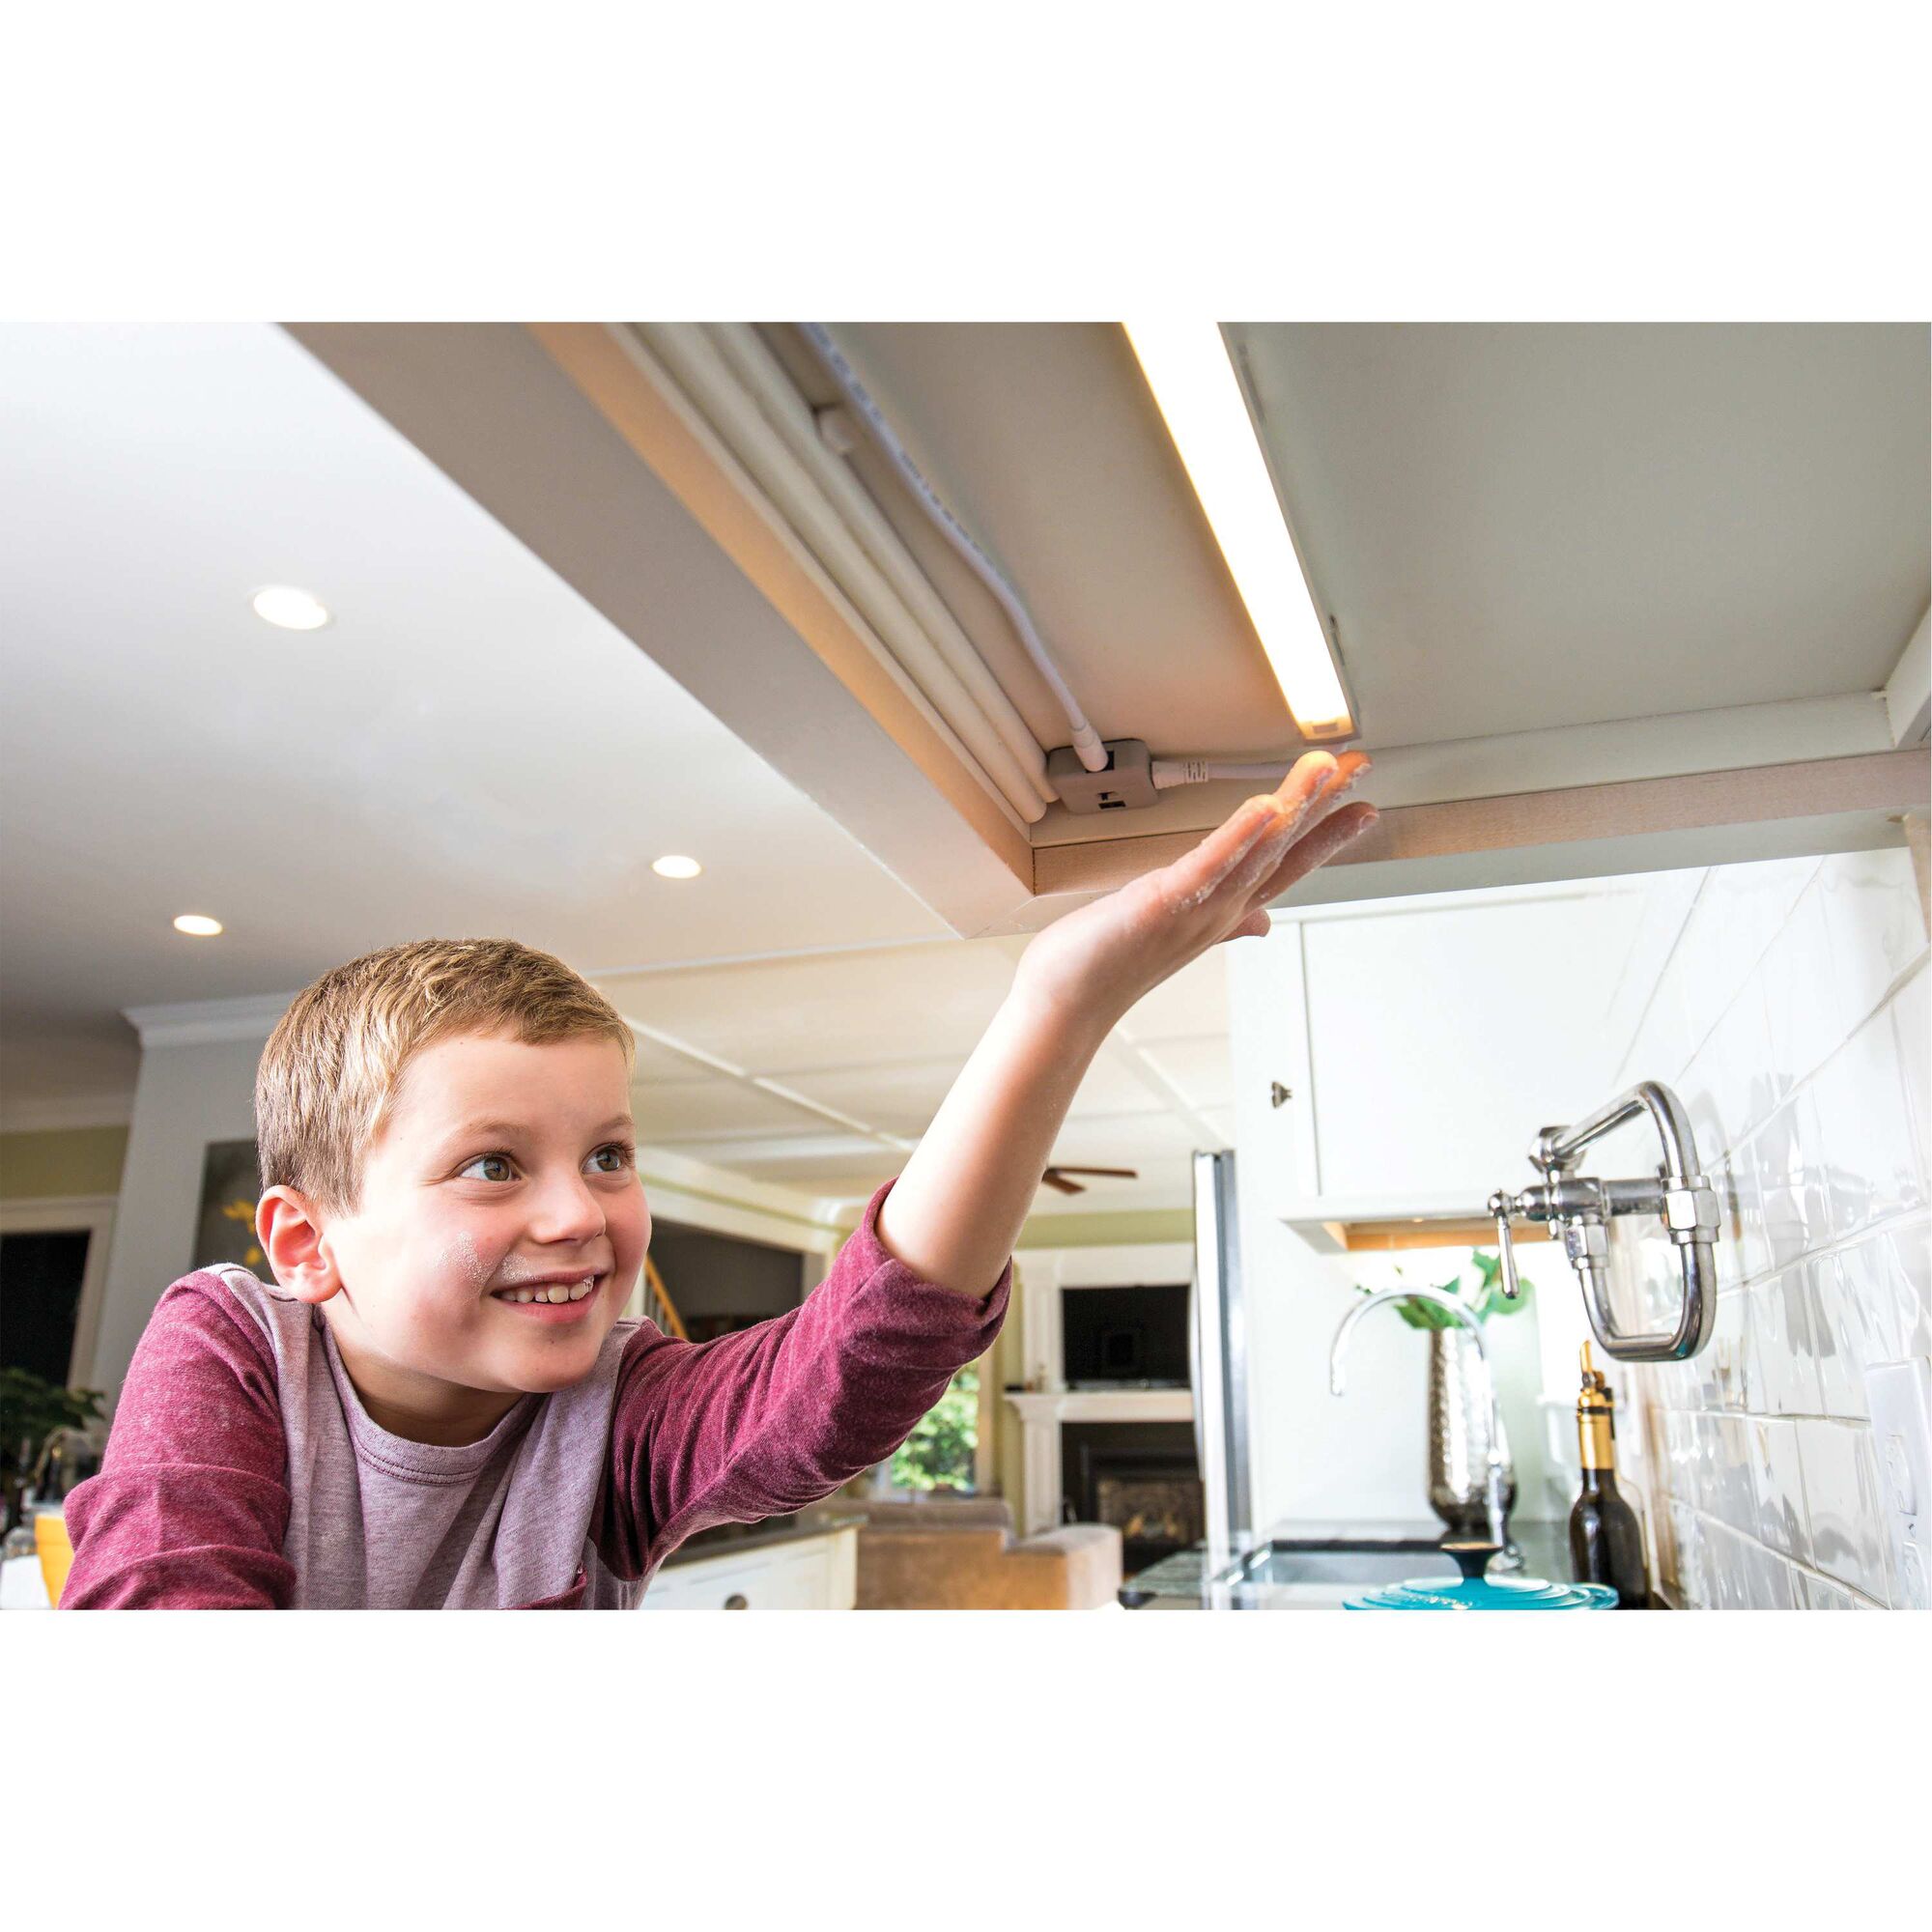 Motion sensor to turn 1 BAR L E D UNDER CABINET LIGHTING KIT on or off in use by a kid.